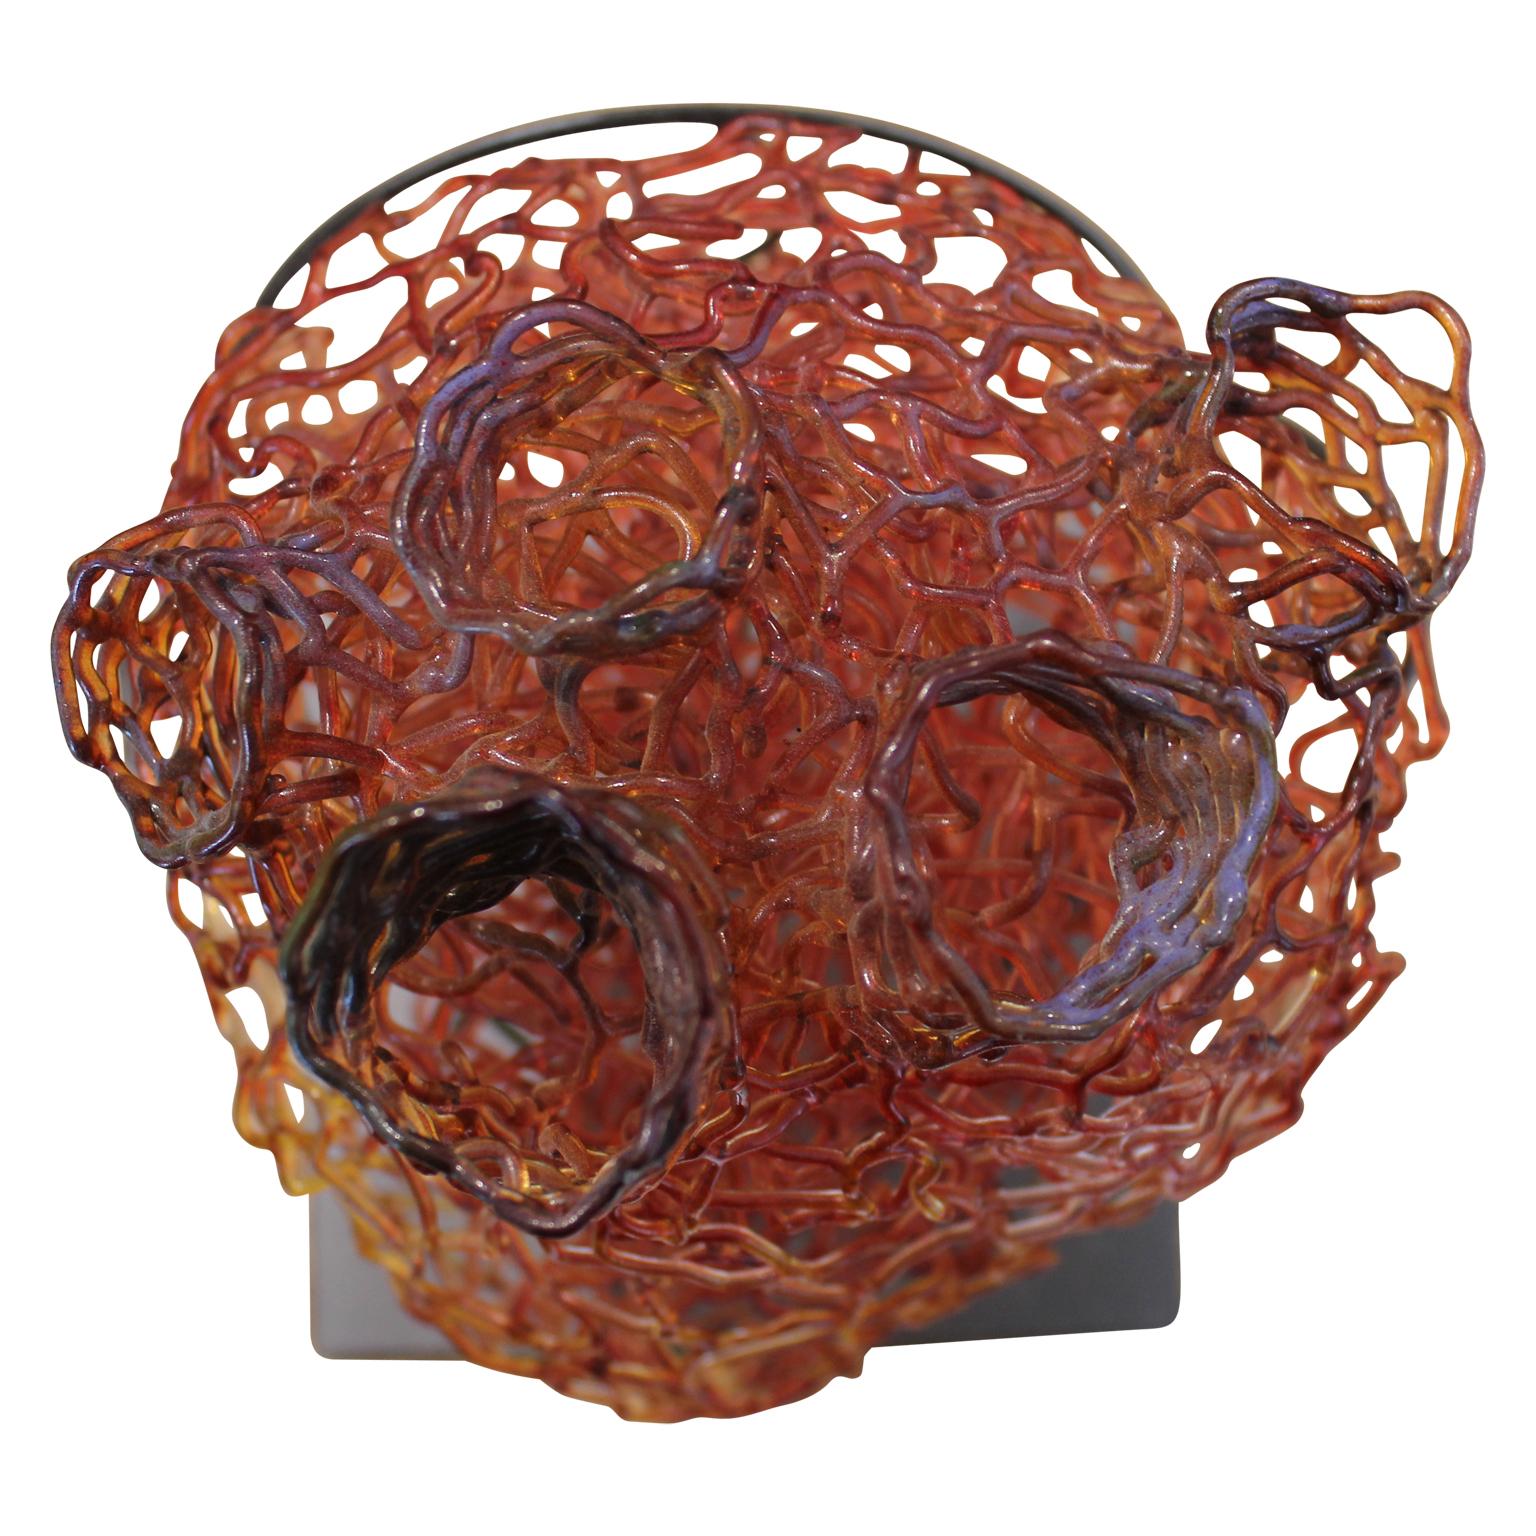 Blown Glass Red and Orange Anatomical Heart Sculpture - Brown Abstract Sculpture by Unknown